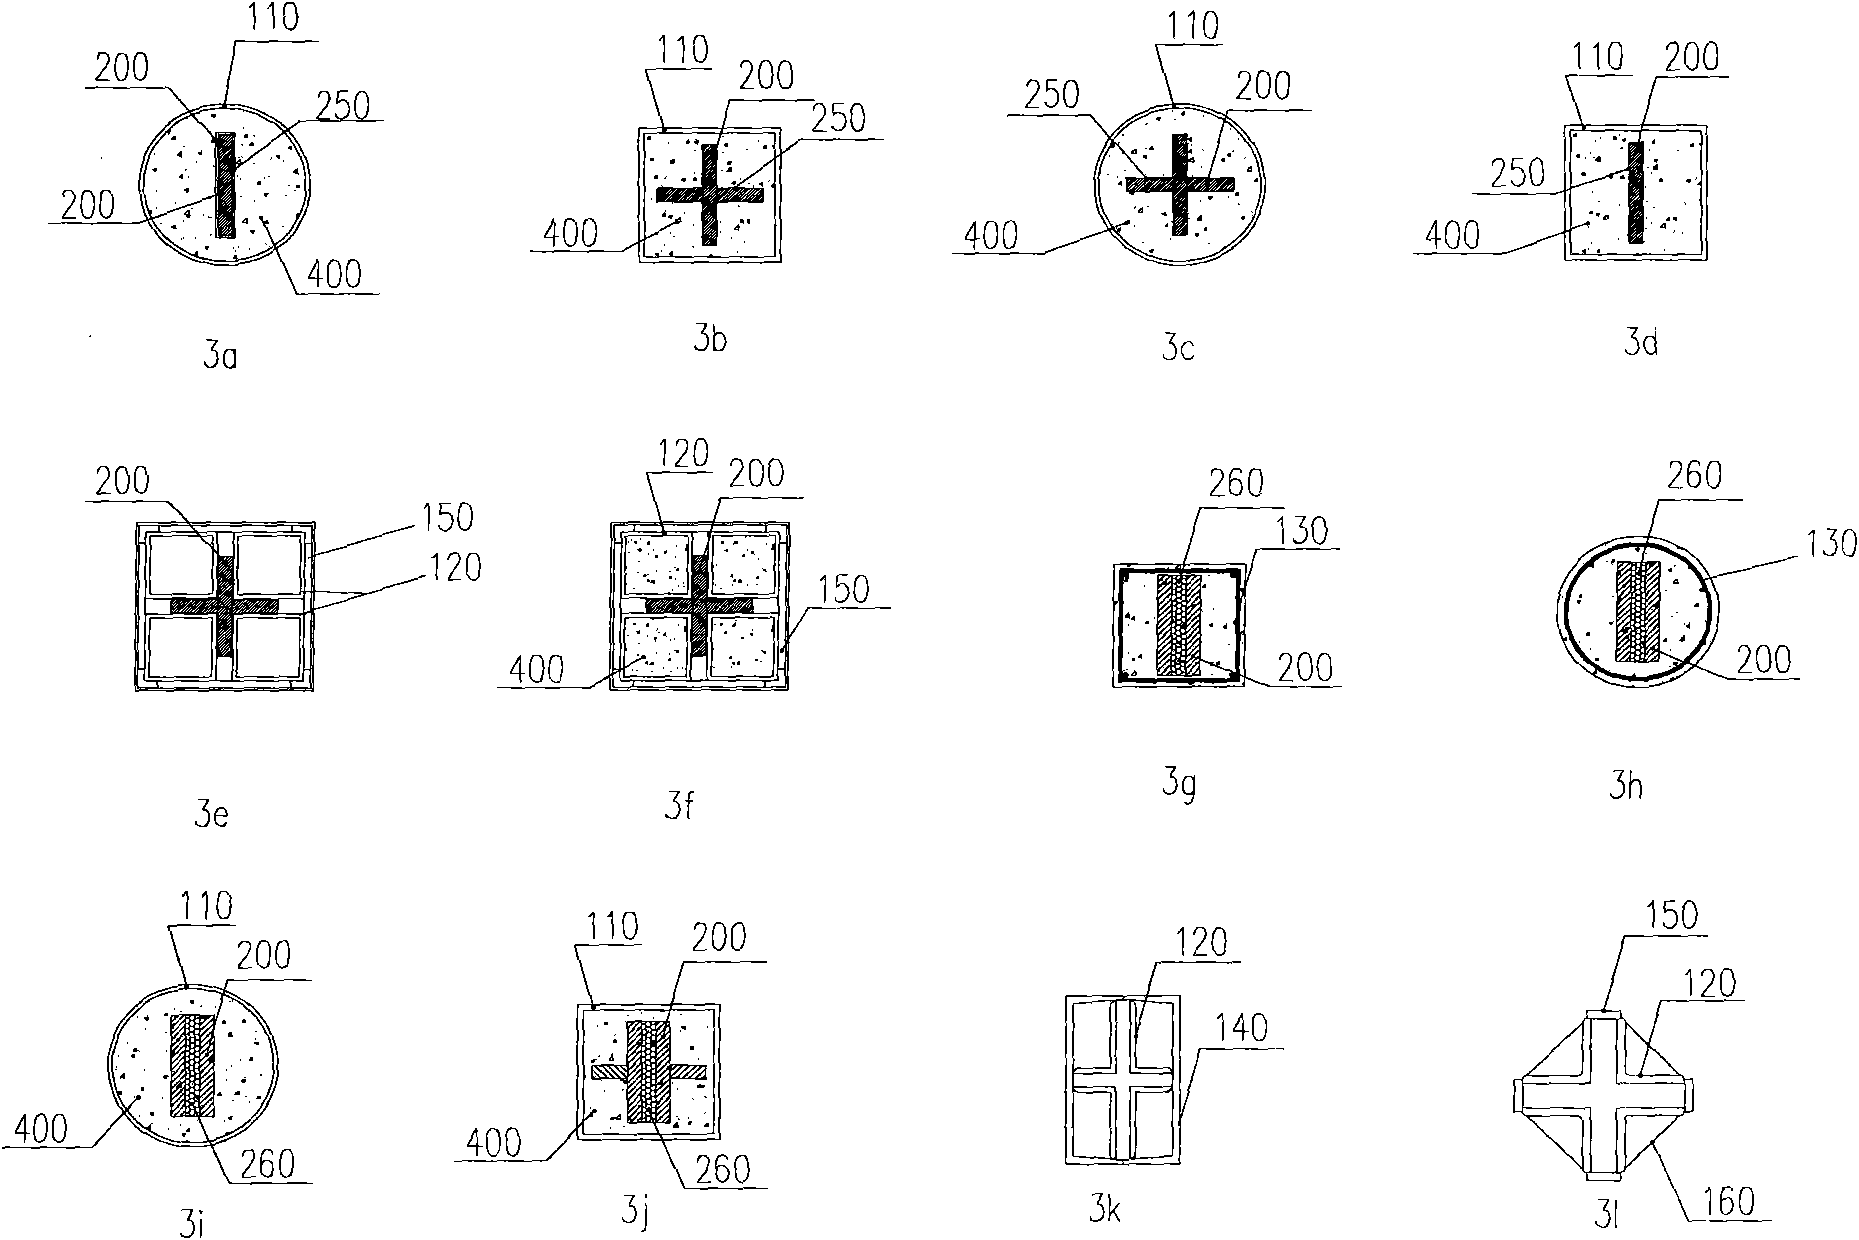 Energy dissipation and shock absorption mechanism